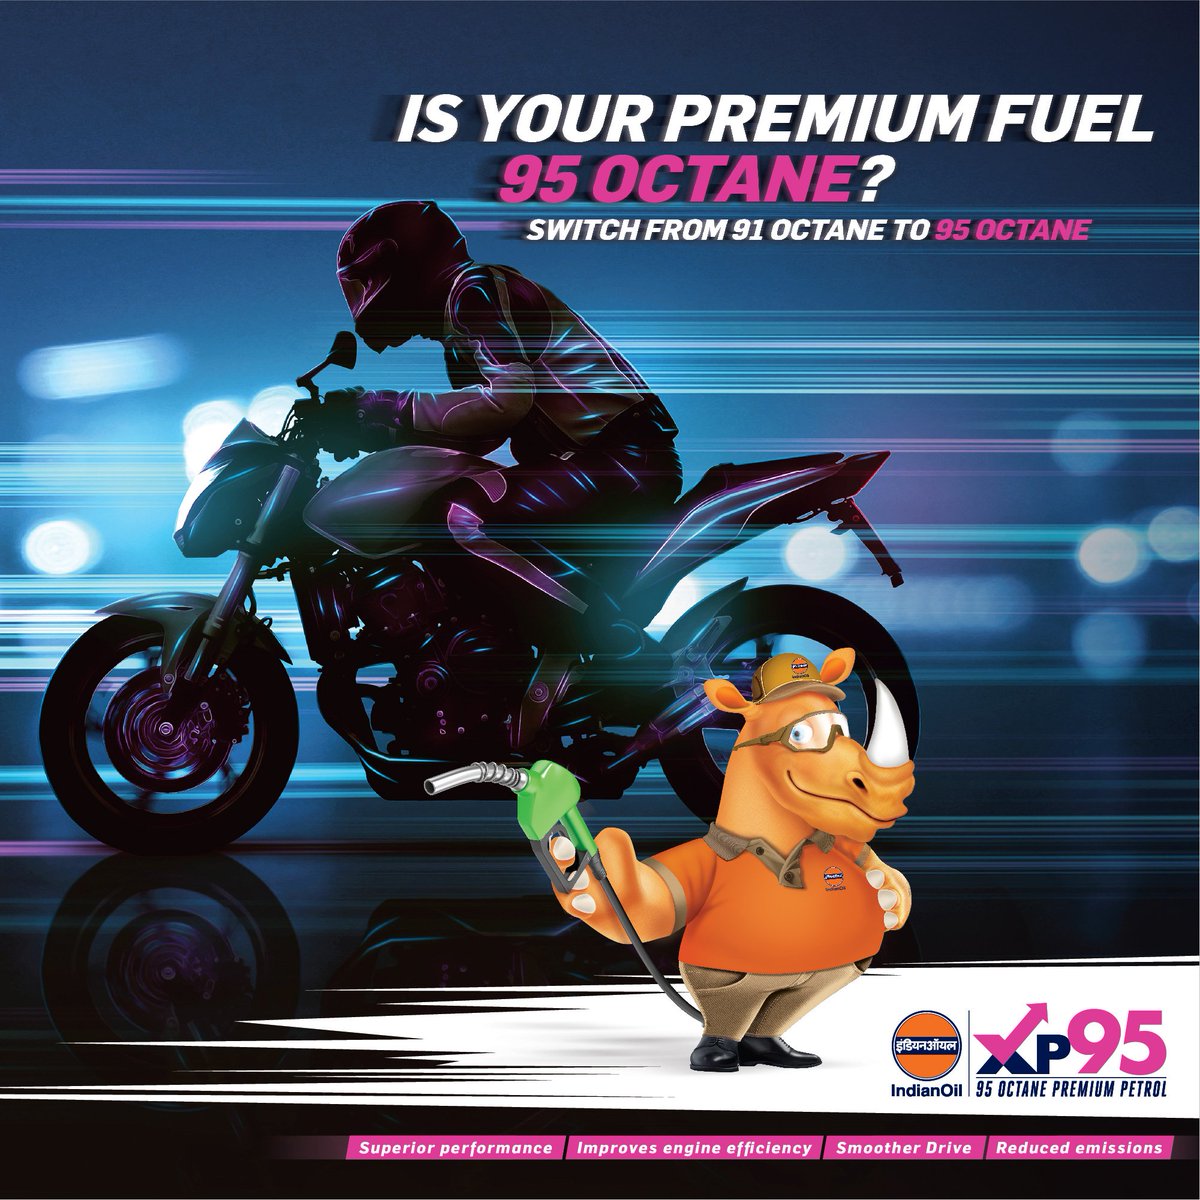 Master the road with the all-new XP95 ! The 95 Octane Premium Petrol from IndianOil.​ Experience the thrill of Octane 95 with superior performance, better mileage & reduced emissions. Let the smoother rides begin.